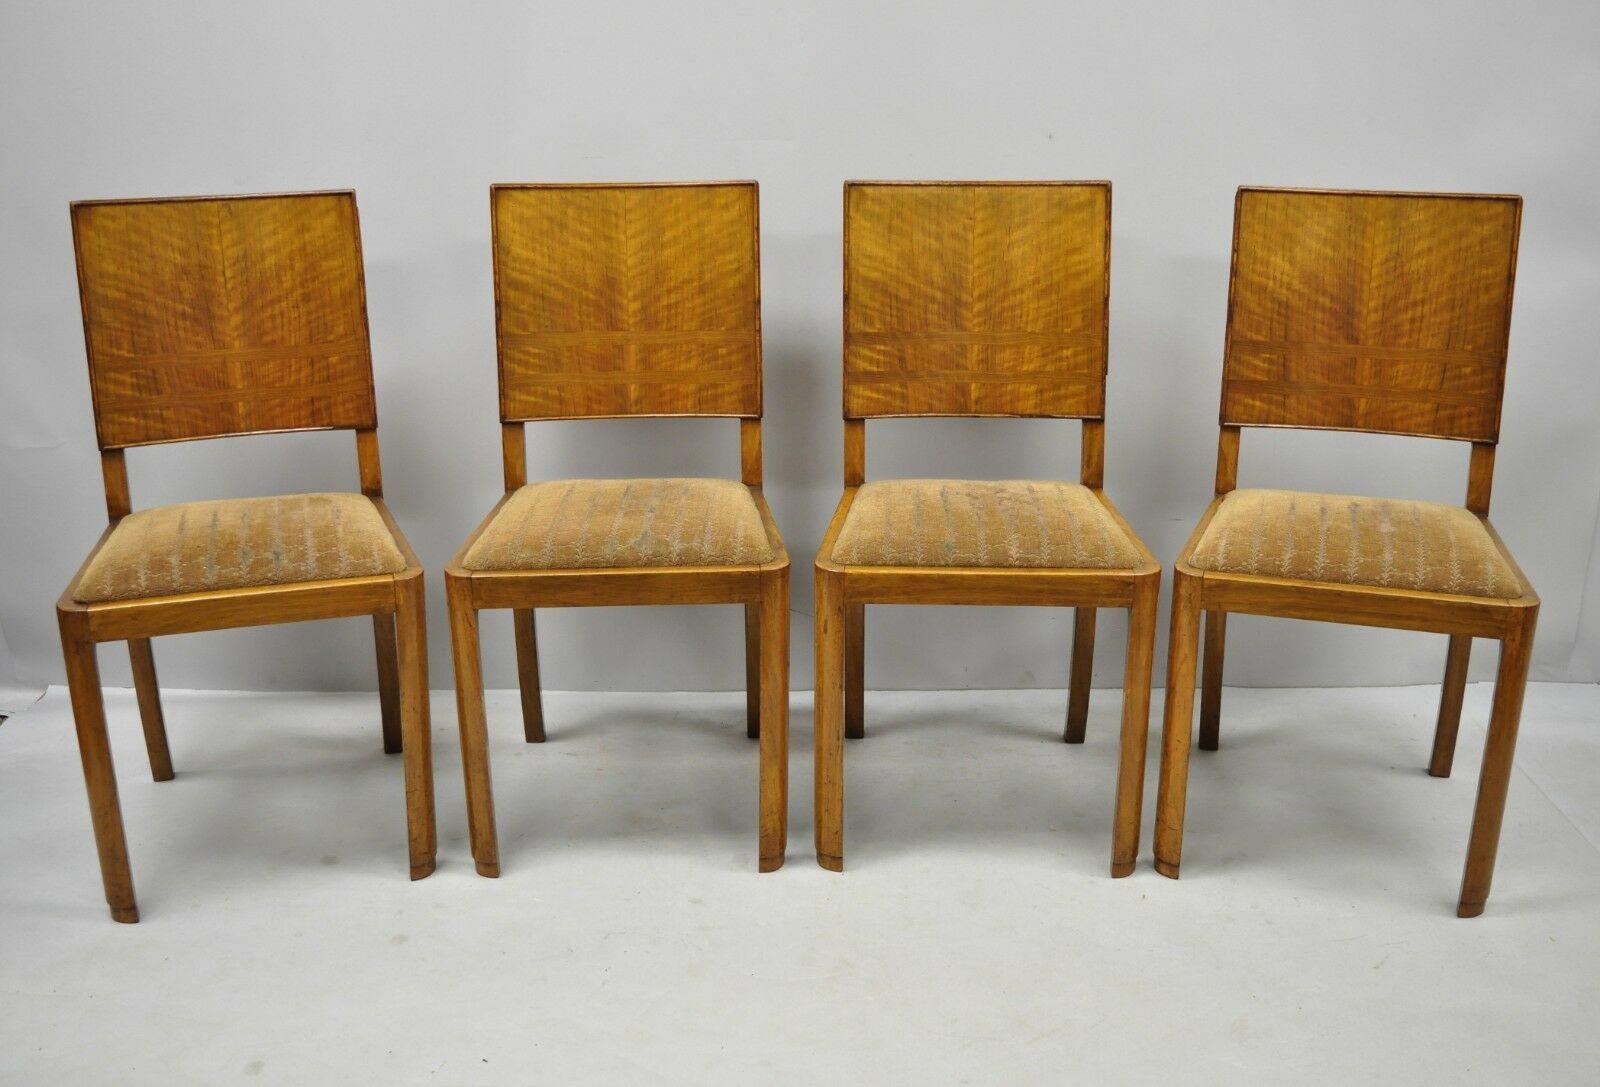 Antique French Art Deco Mahogany Inlaid 5 Piece Dining Room Set. Listing includes 4 side chairs and matching rectangular dining table. Set features beautiful wood grain, band inlay, stretcher support to table, curved and inlaid backs to chairs, drop